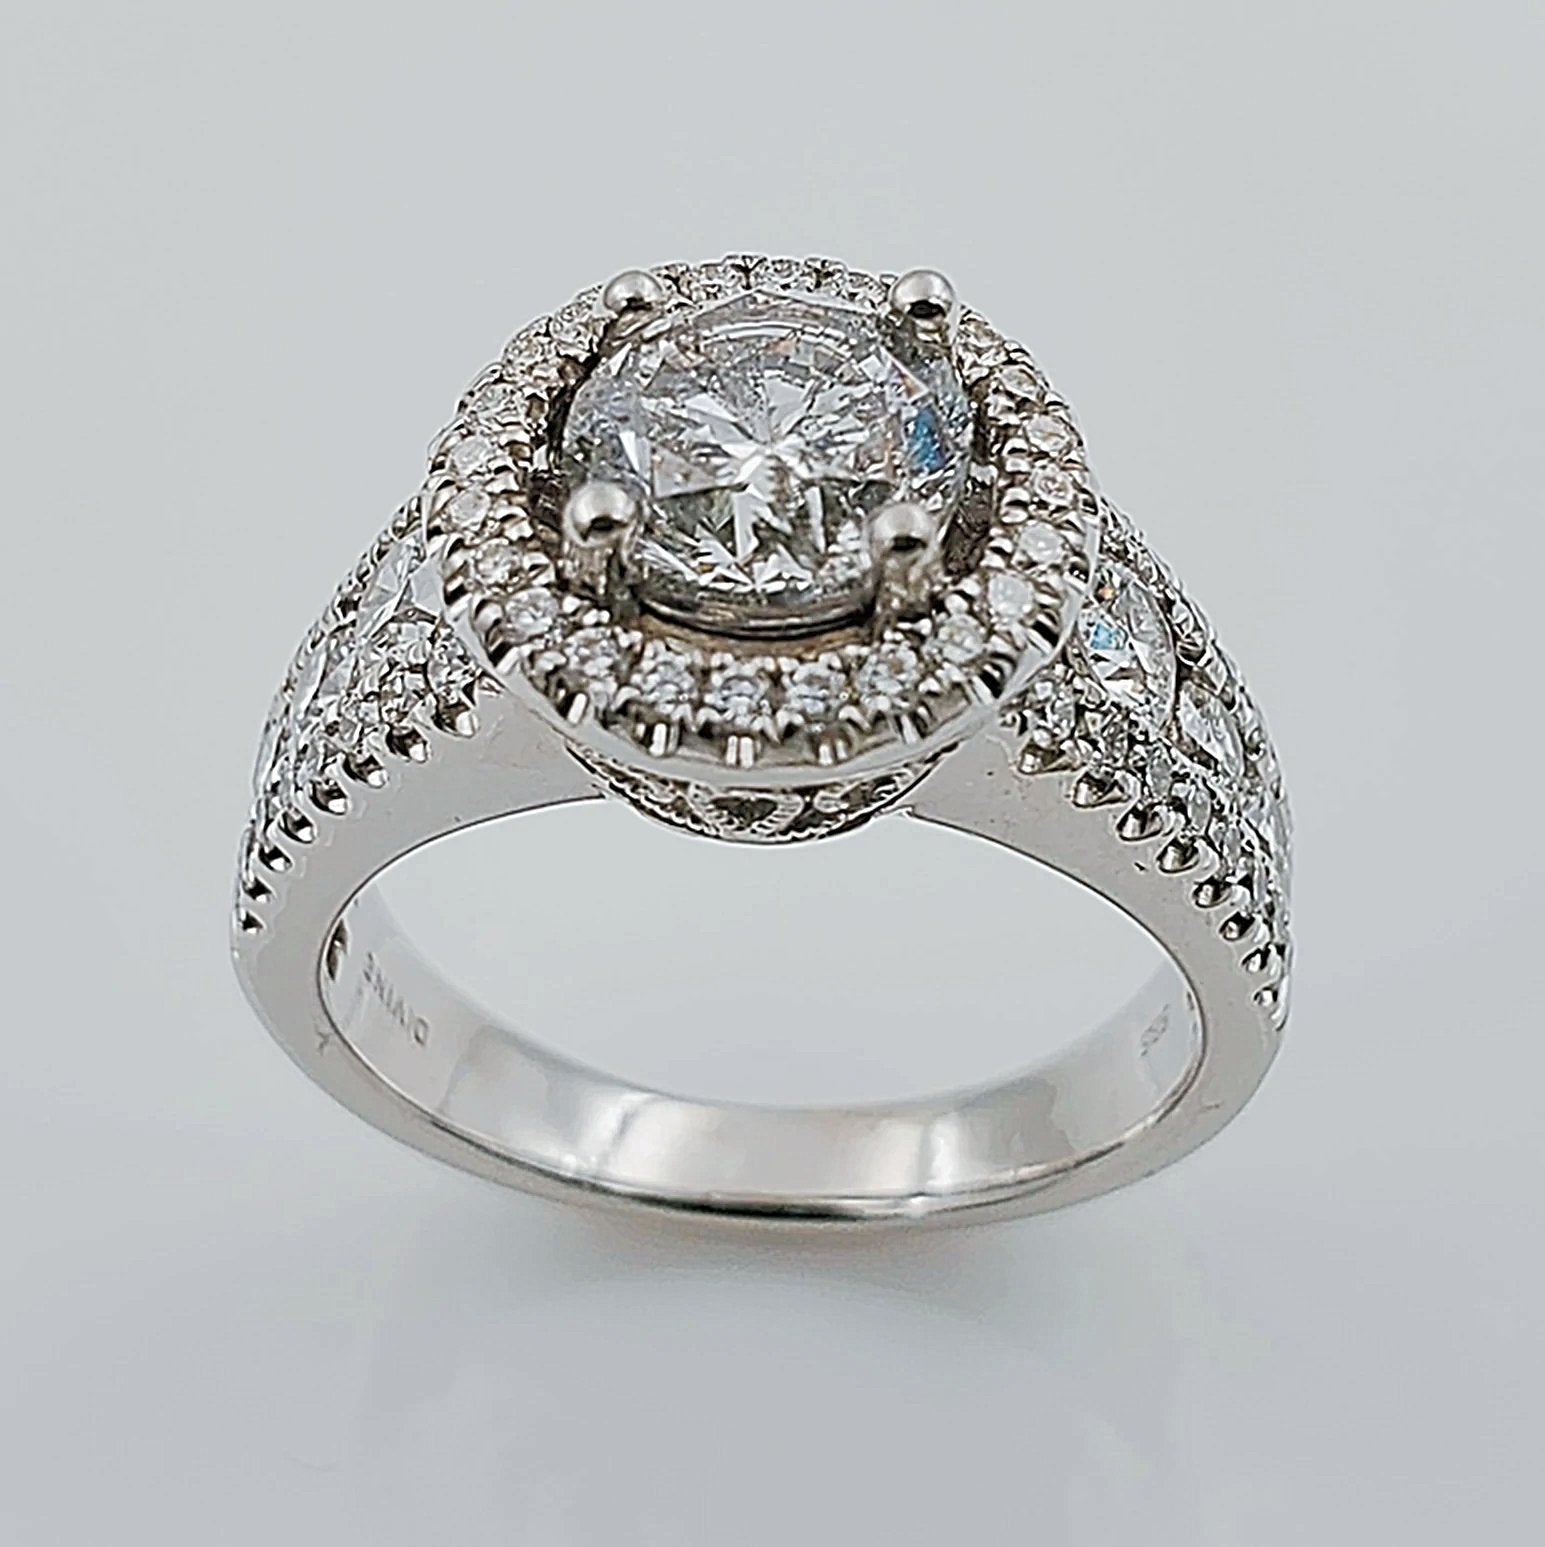 Women's 14K White Gold with 1.00 CT Round Diamond (I2 Color I) 5.0 GR Total Weight Wedding Ring. (Size: 4.75)